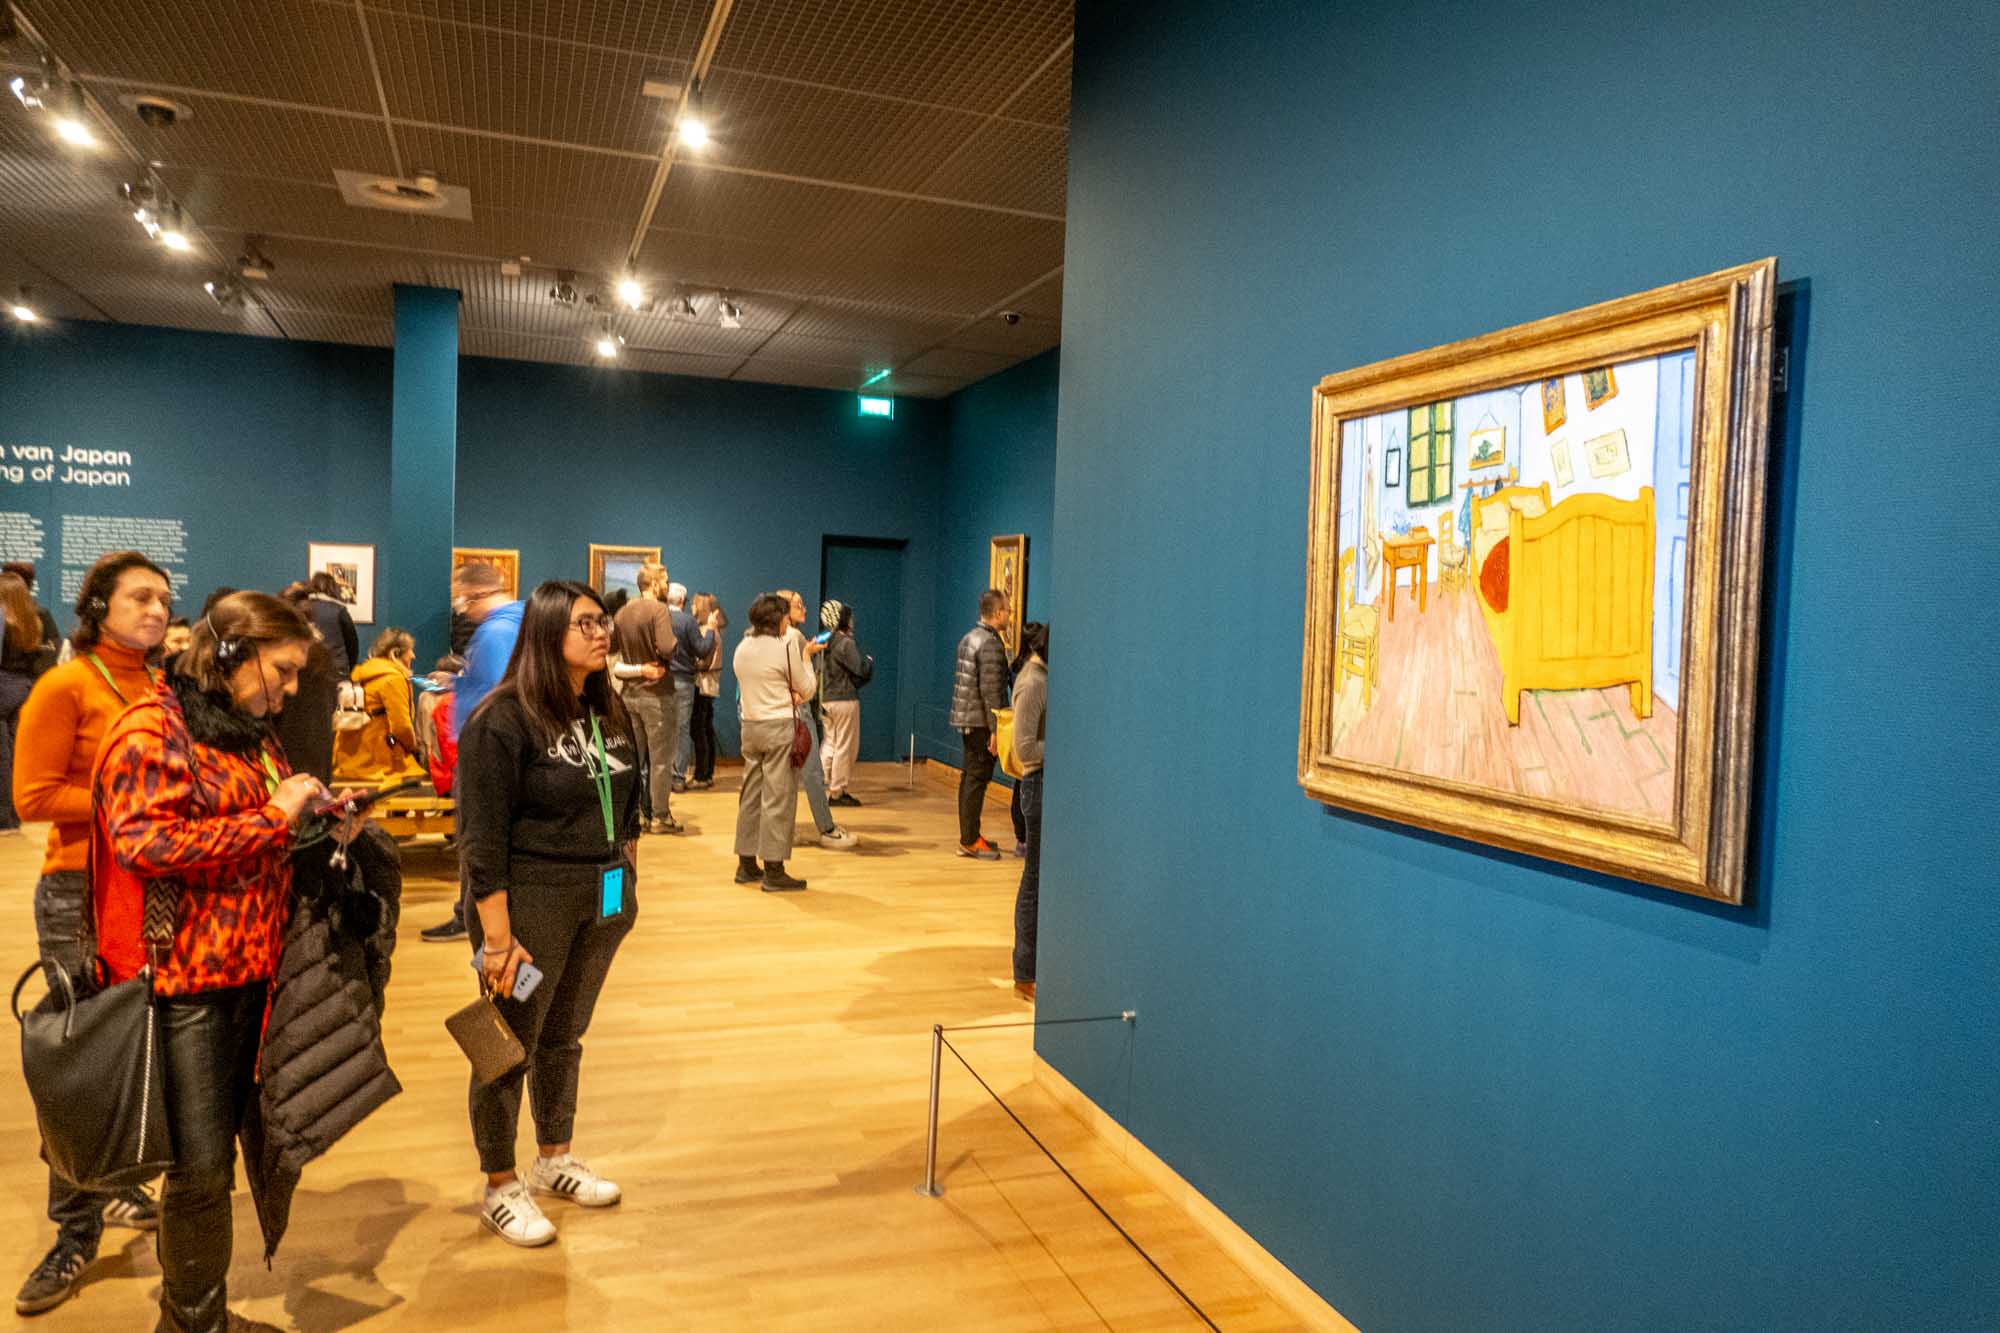 Visitors looking at a painting in the Van Gogh Museum